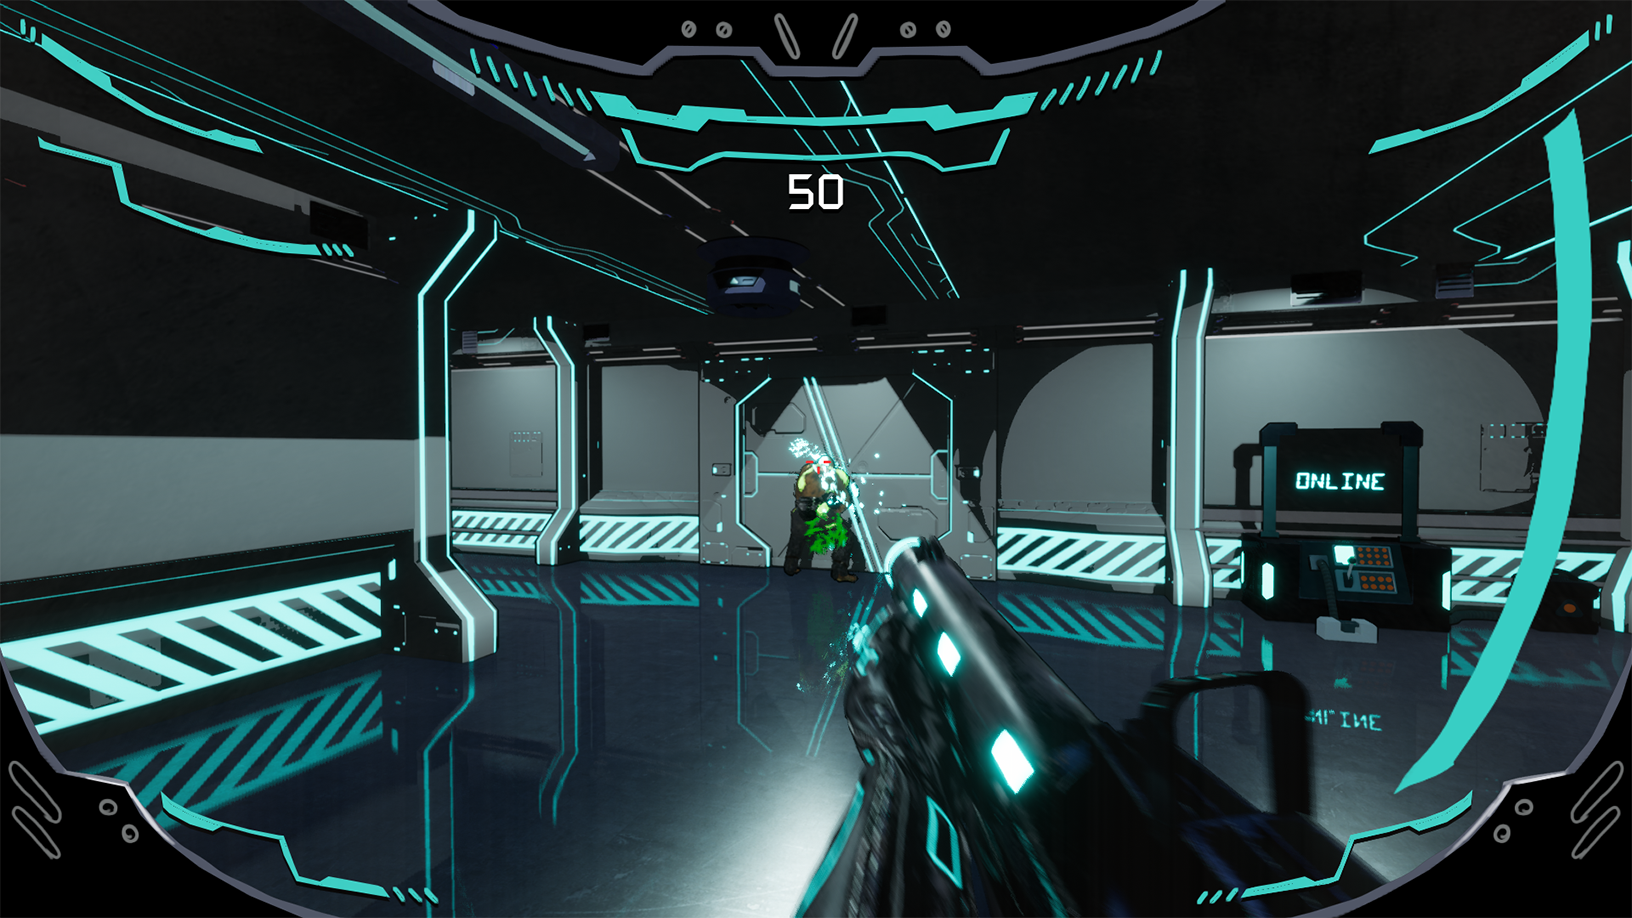 BA Games Art and Design work by Joe Hamilton showing a screenshot of his global games jam submission; a first-person futuristic shooter